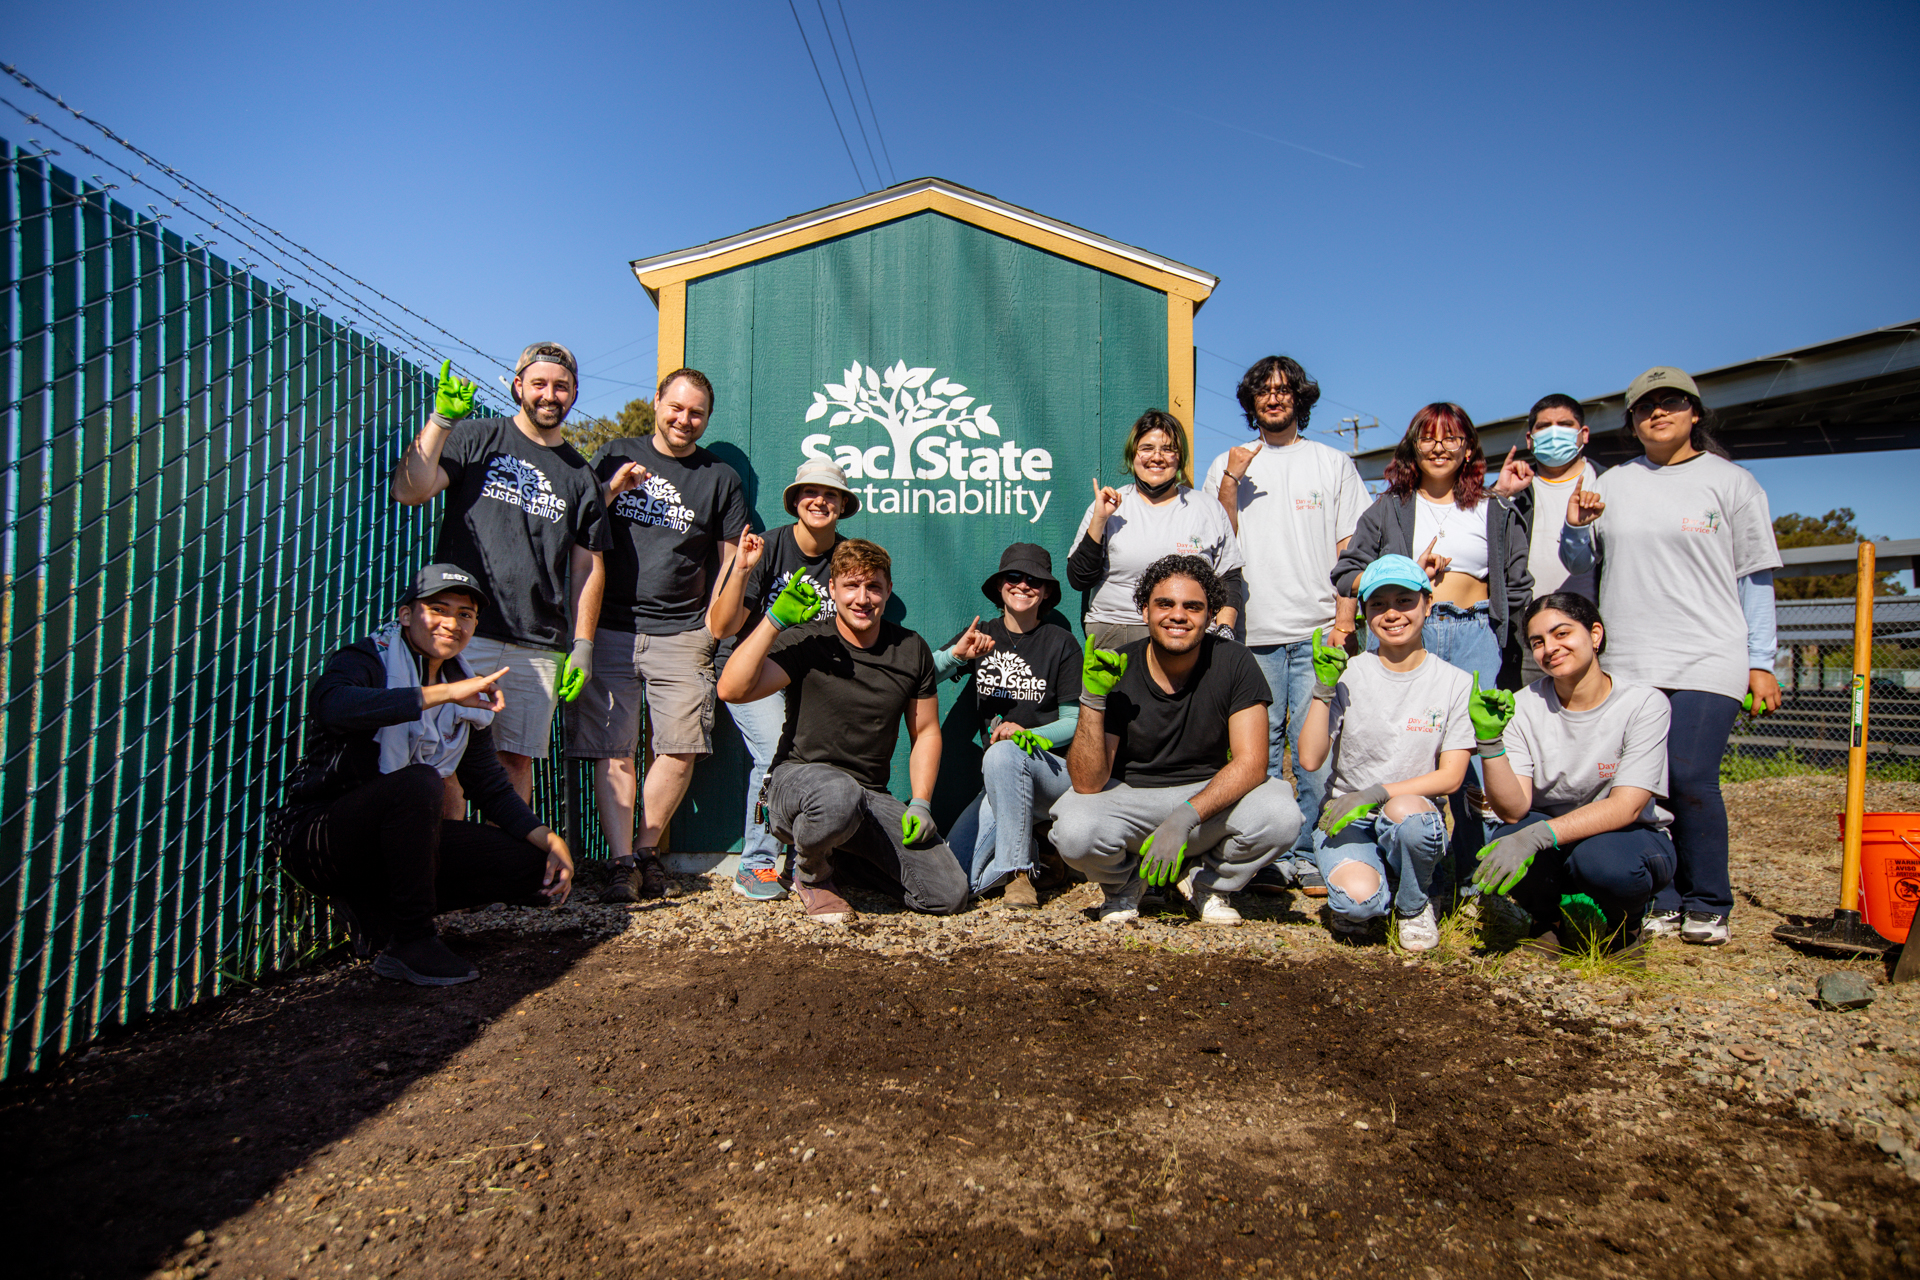 Alternative Spring Break volunteers salute Stingers Up near a Sac State Sustainability shed.